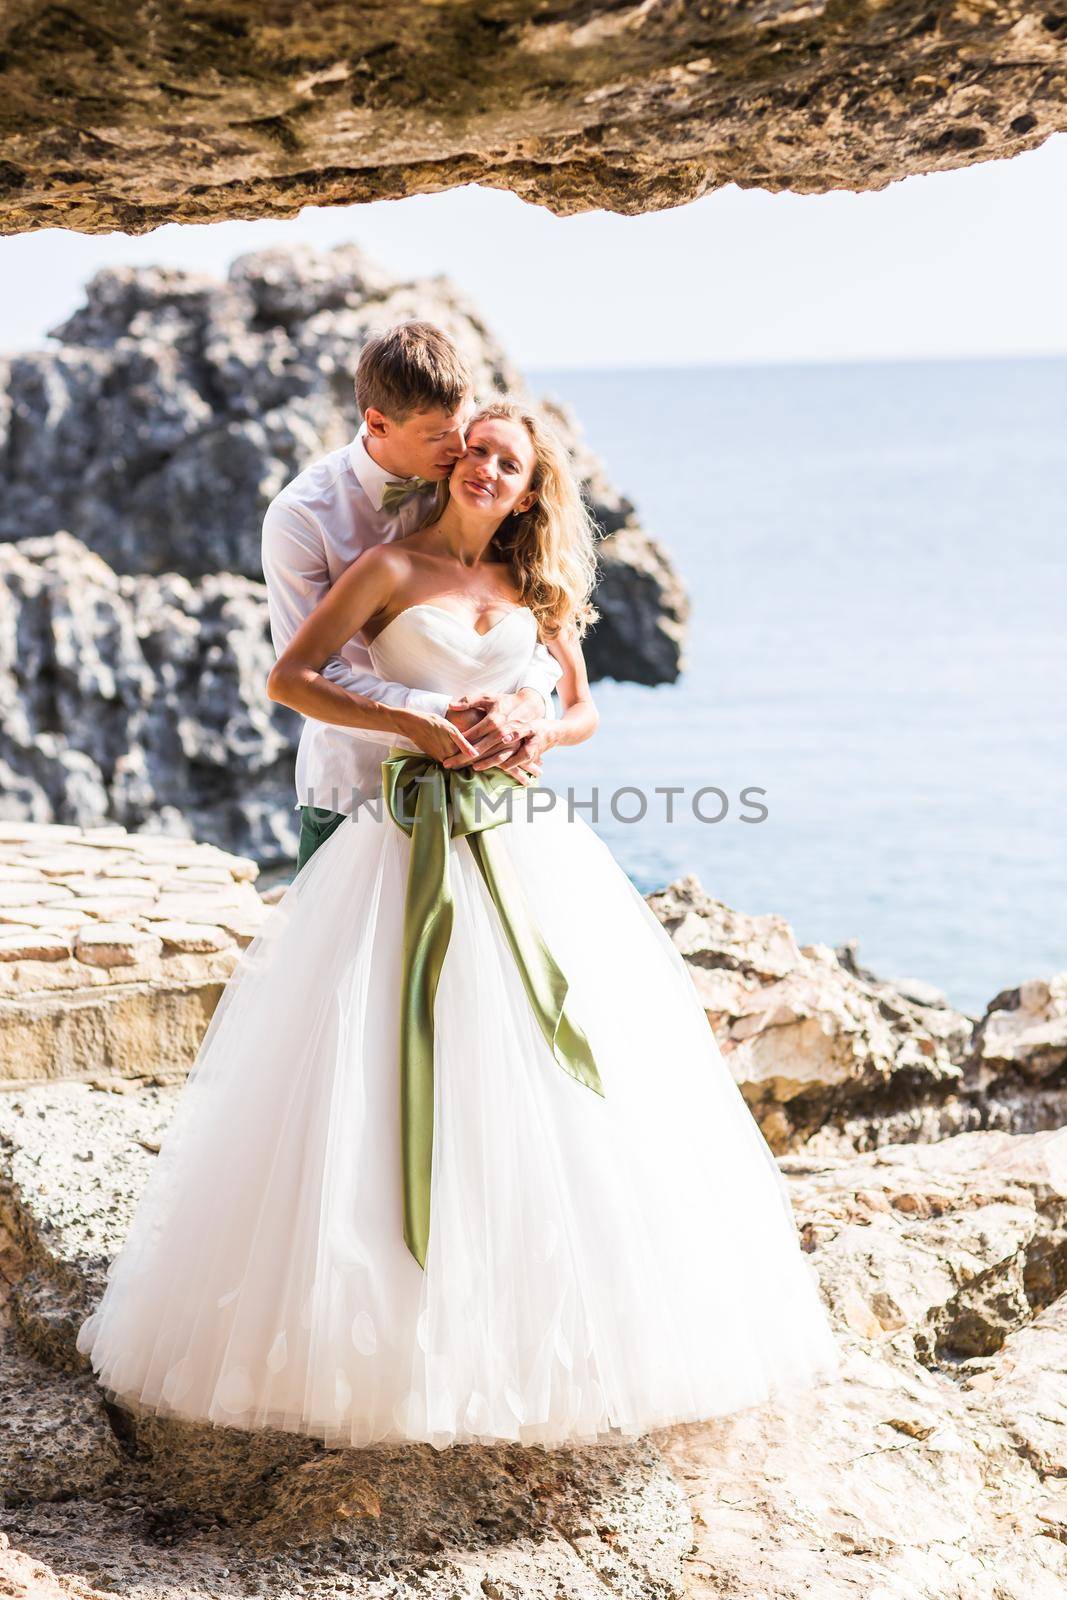 Sensual portrait of a young newlywed couple. Bride and groom outdoor by Satura86